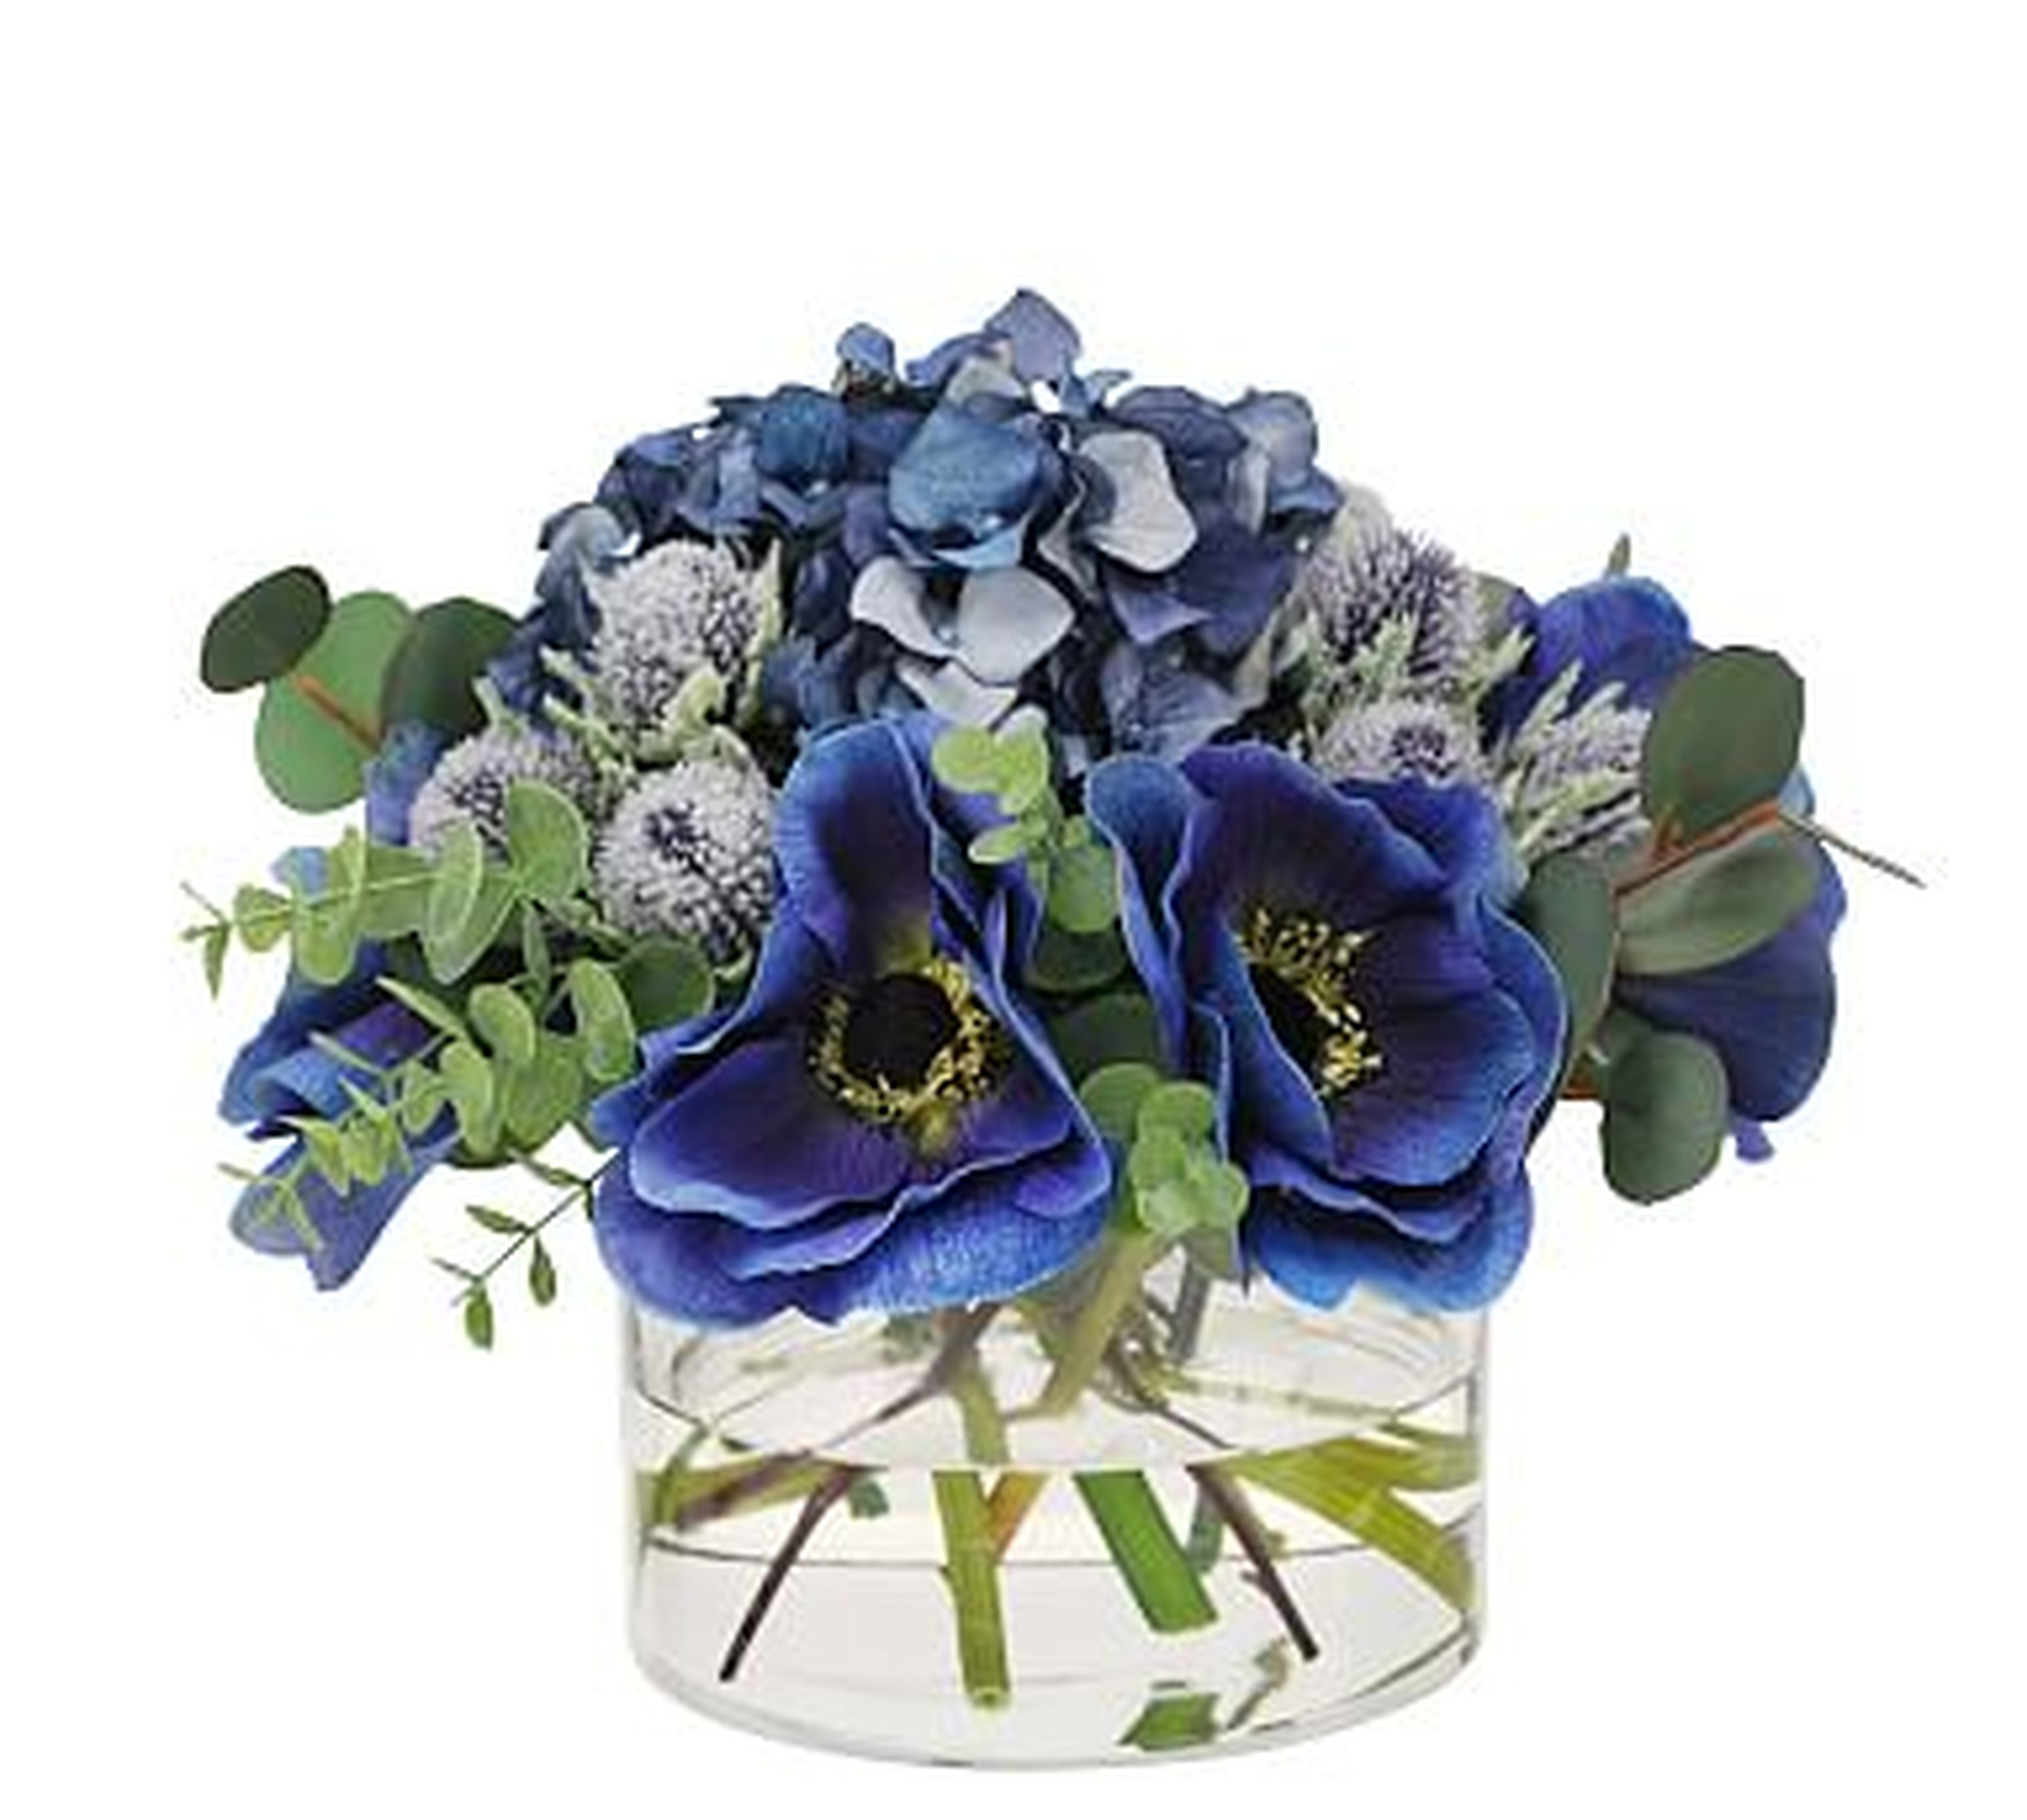 Faux Anemone & Thistle Mixed Blue Composed Arrangement, 8" - Pottery Barn